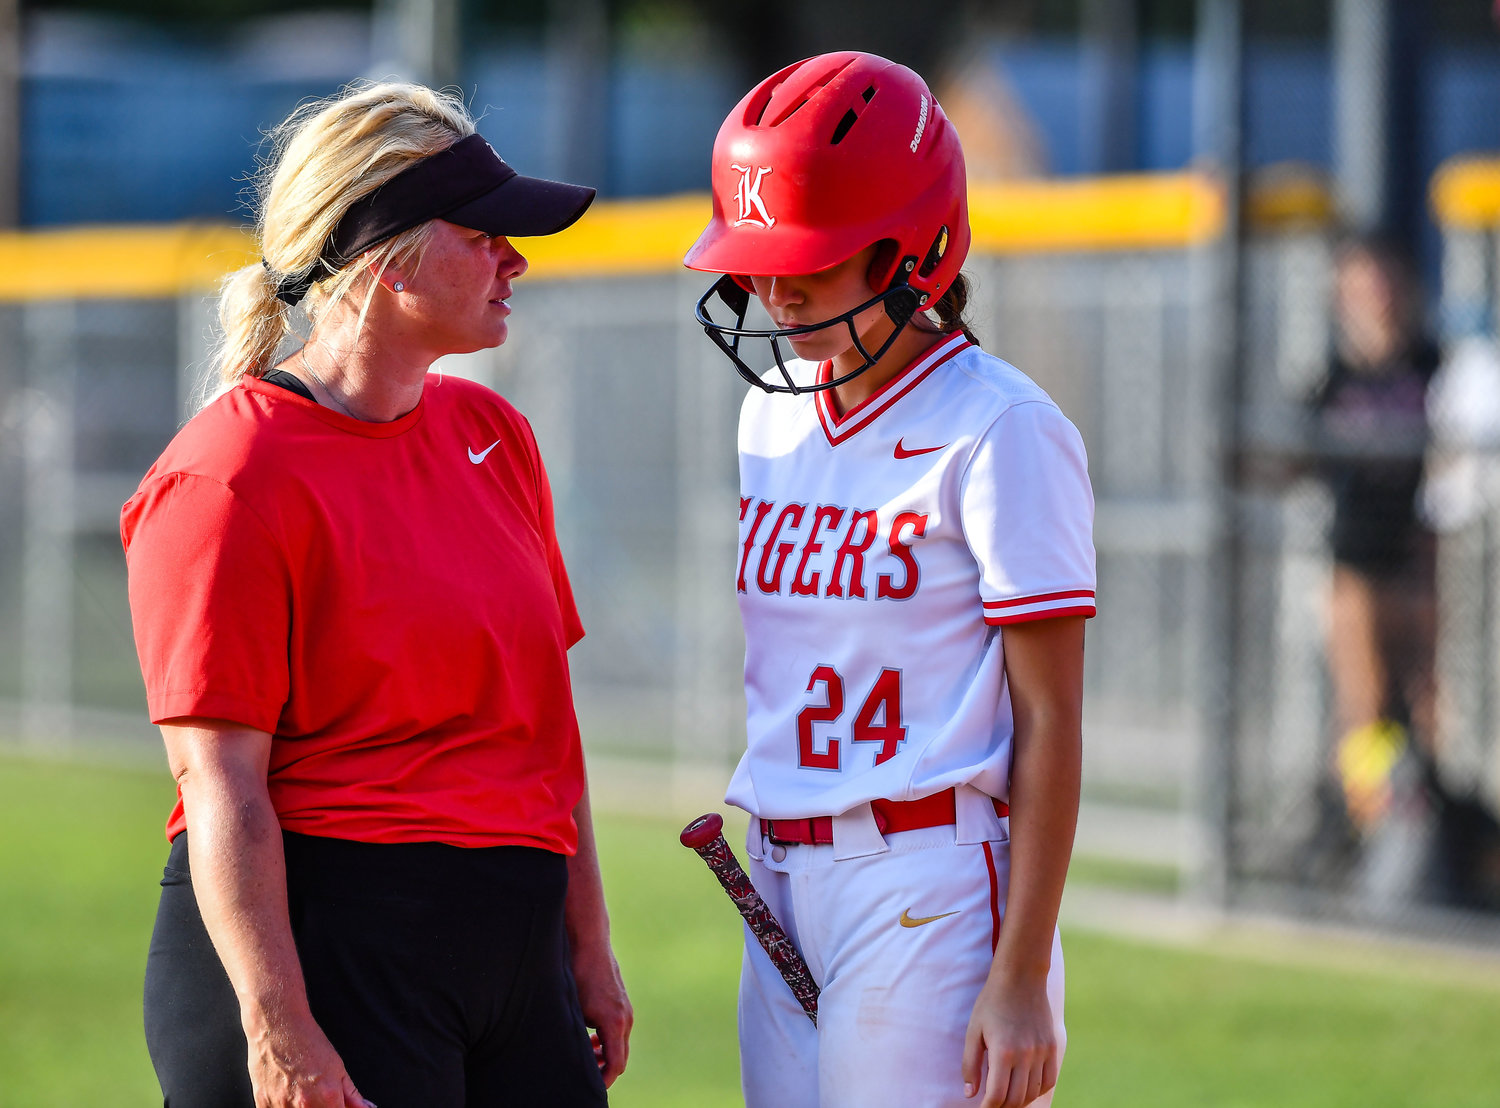 May 13, 2022: Katy's assistant coach Meghan Burrell chats with Katy's Ashlee Piraneo #24 during the Regional Quarterfinal playoff between Katy and Cinco Ranch at Katy HS. (Photo by Mark Goodman / Katy Times)